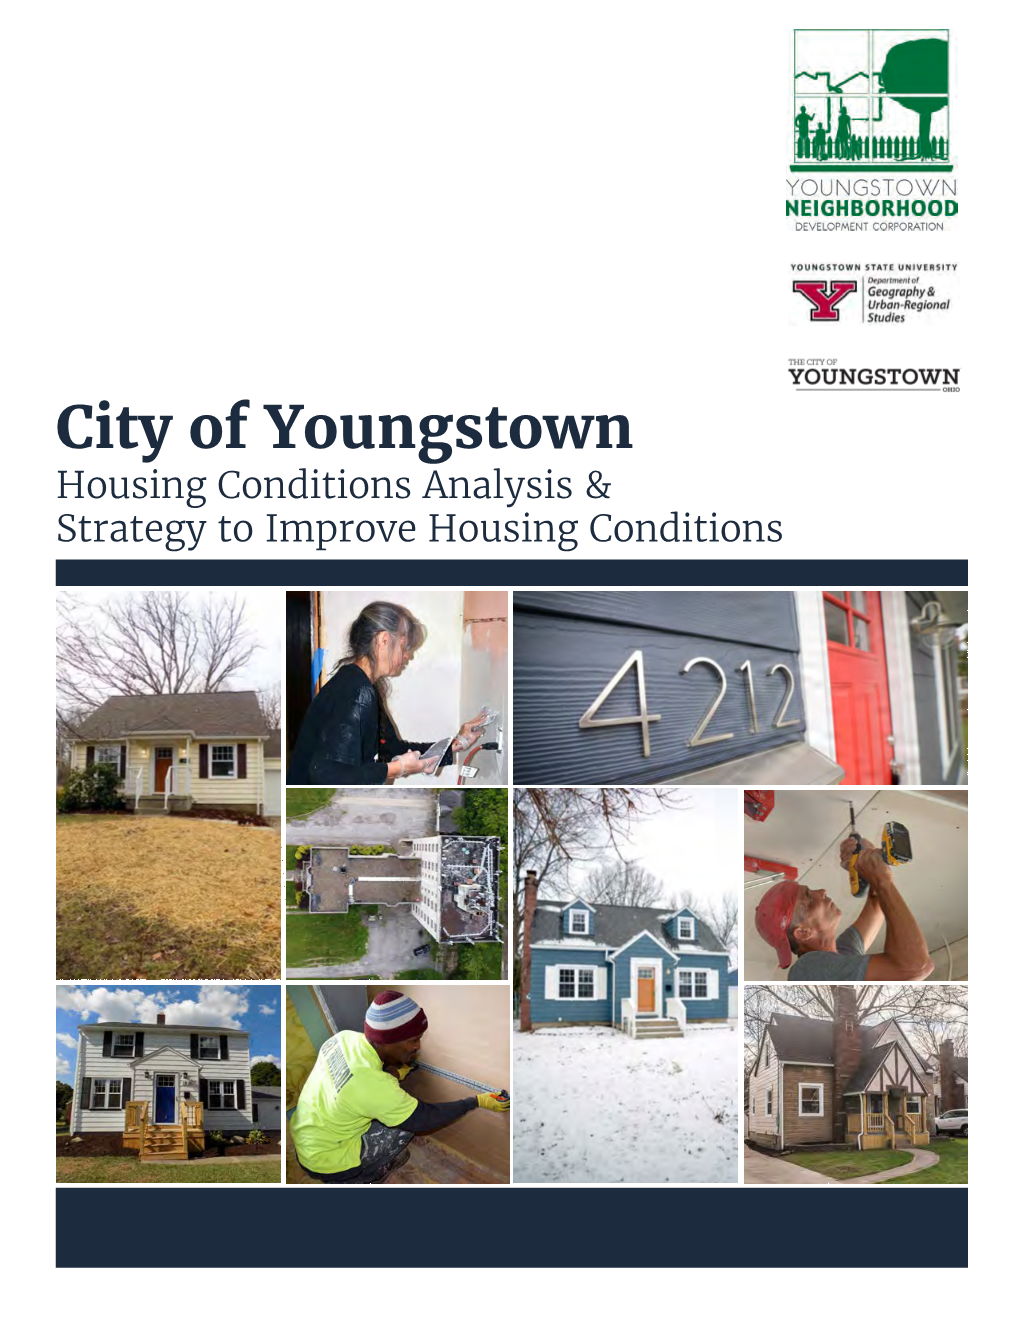 City of Youngstown Strategy to Improve Housing Conditions